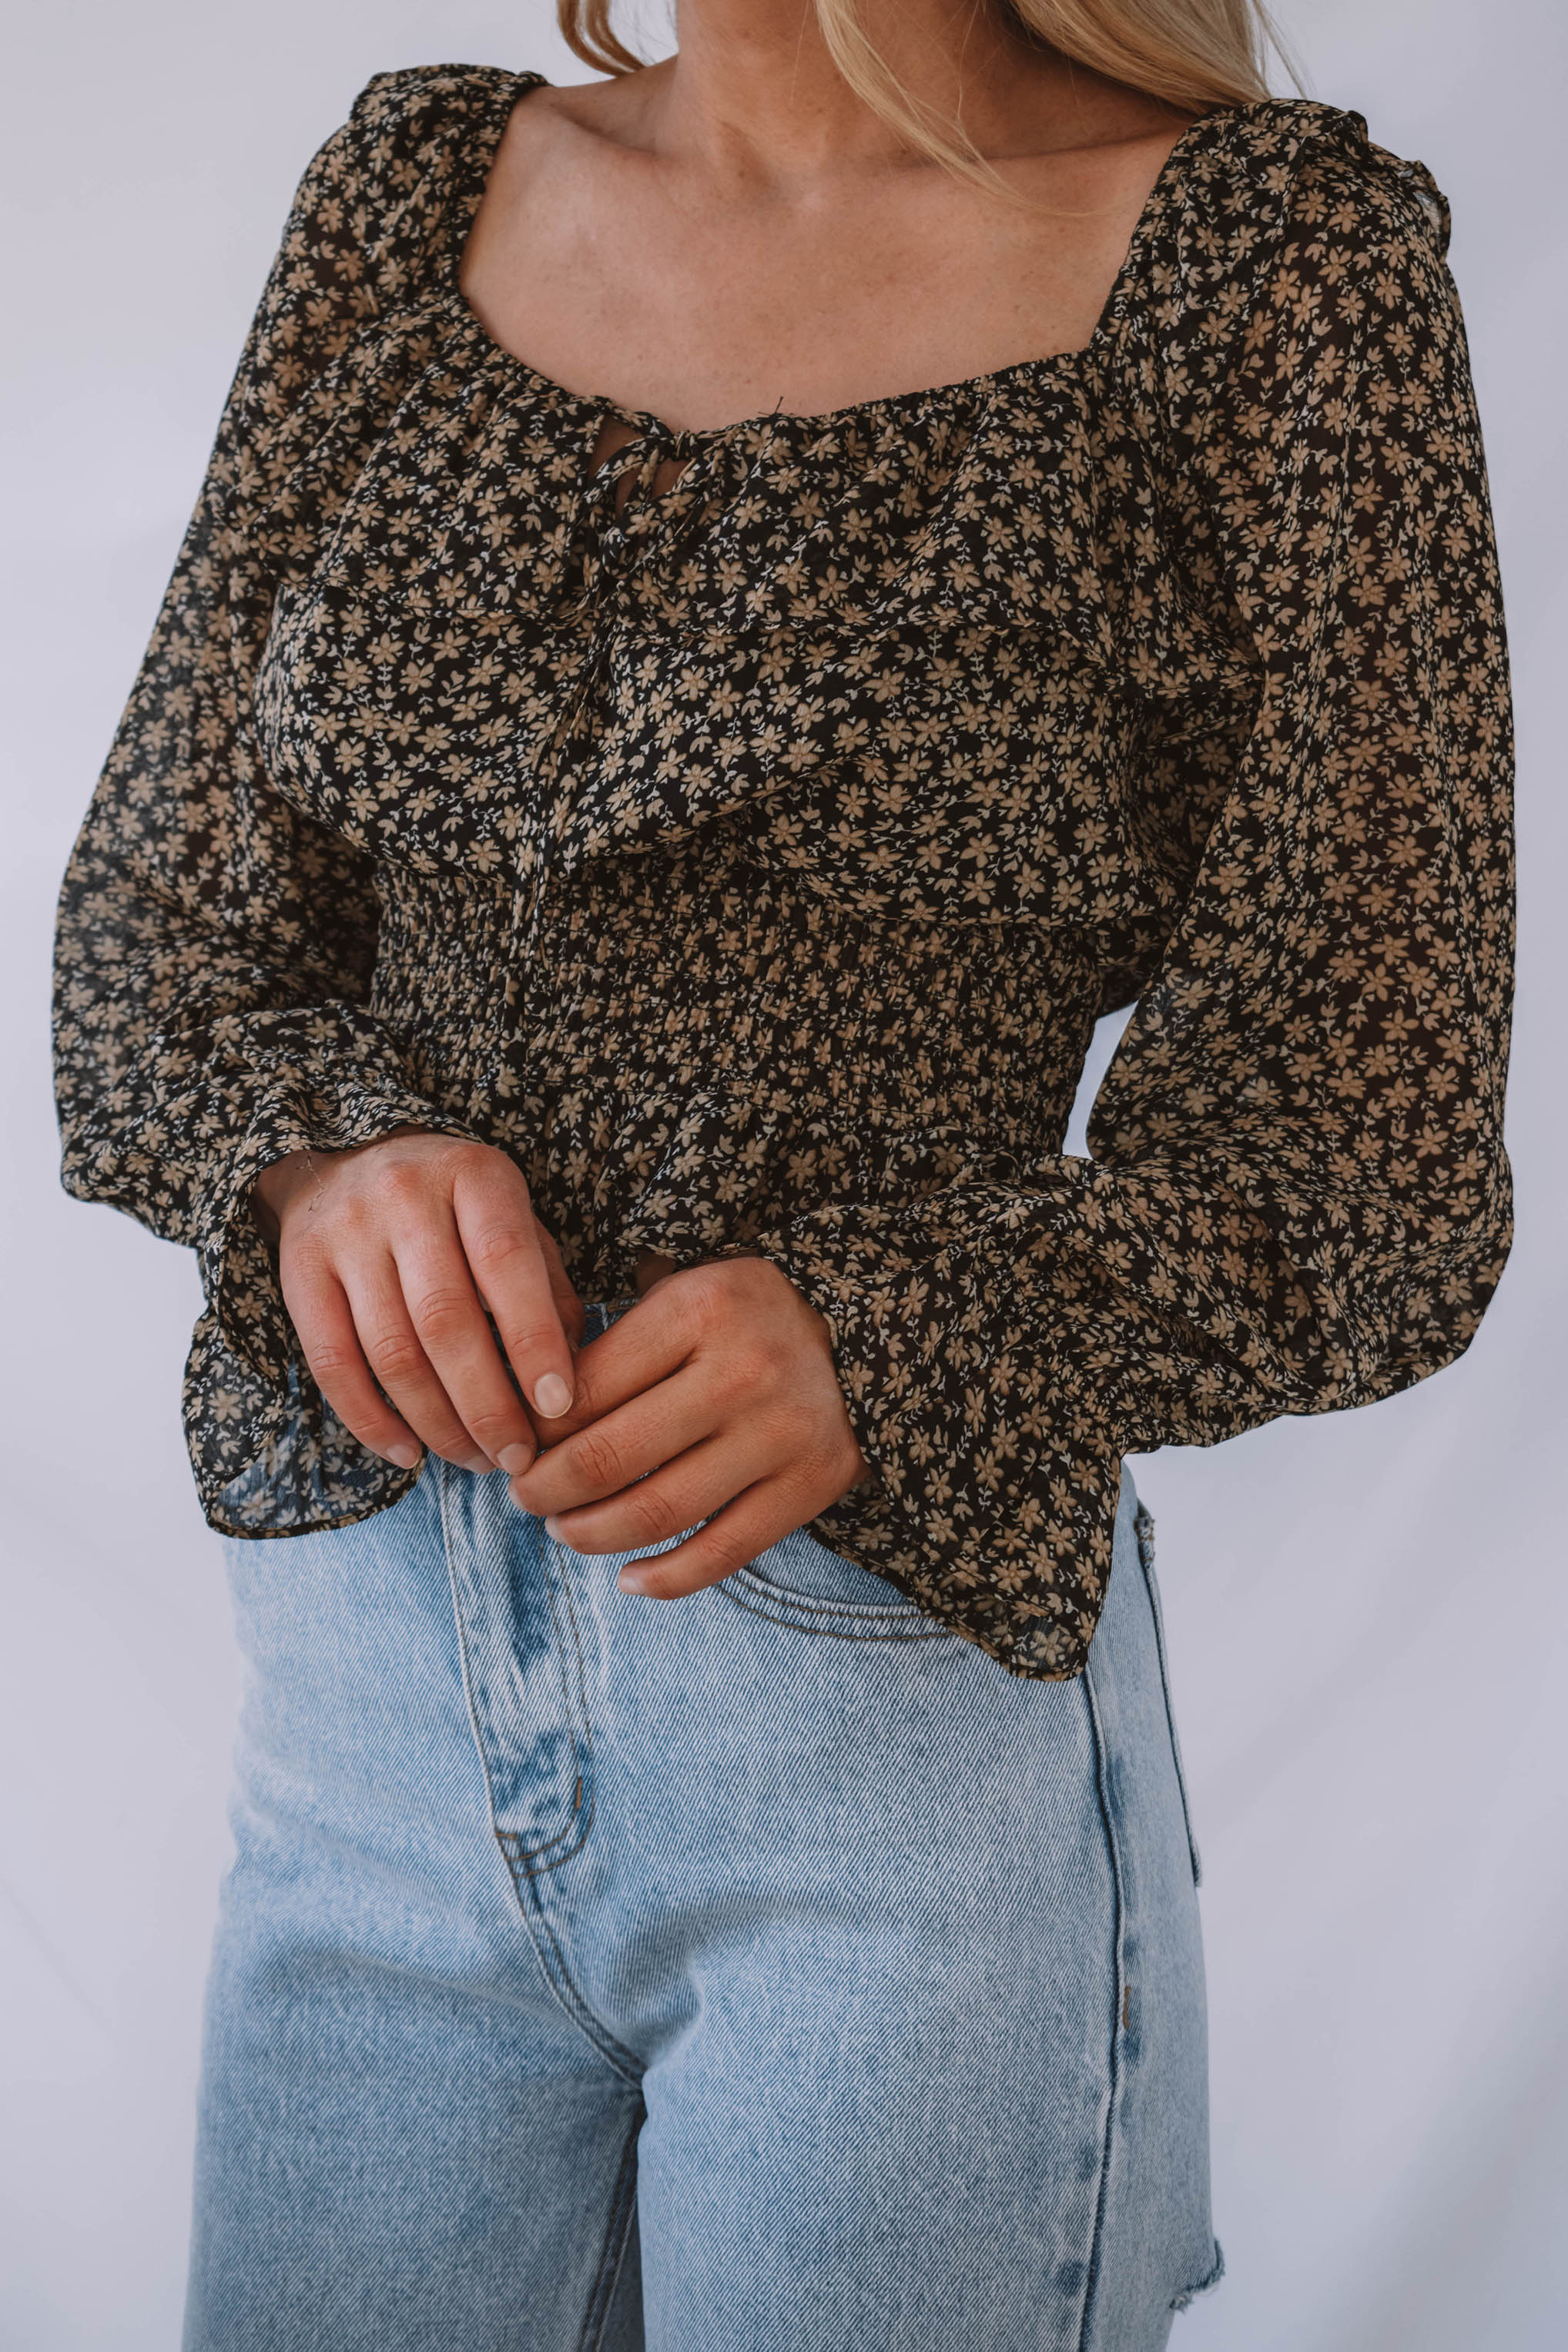 Rosemary Floral Square Neck Ruffle Blouse